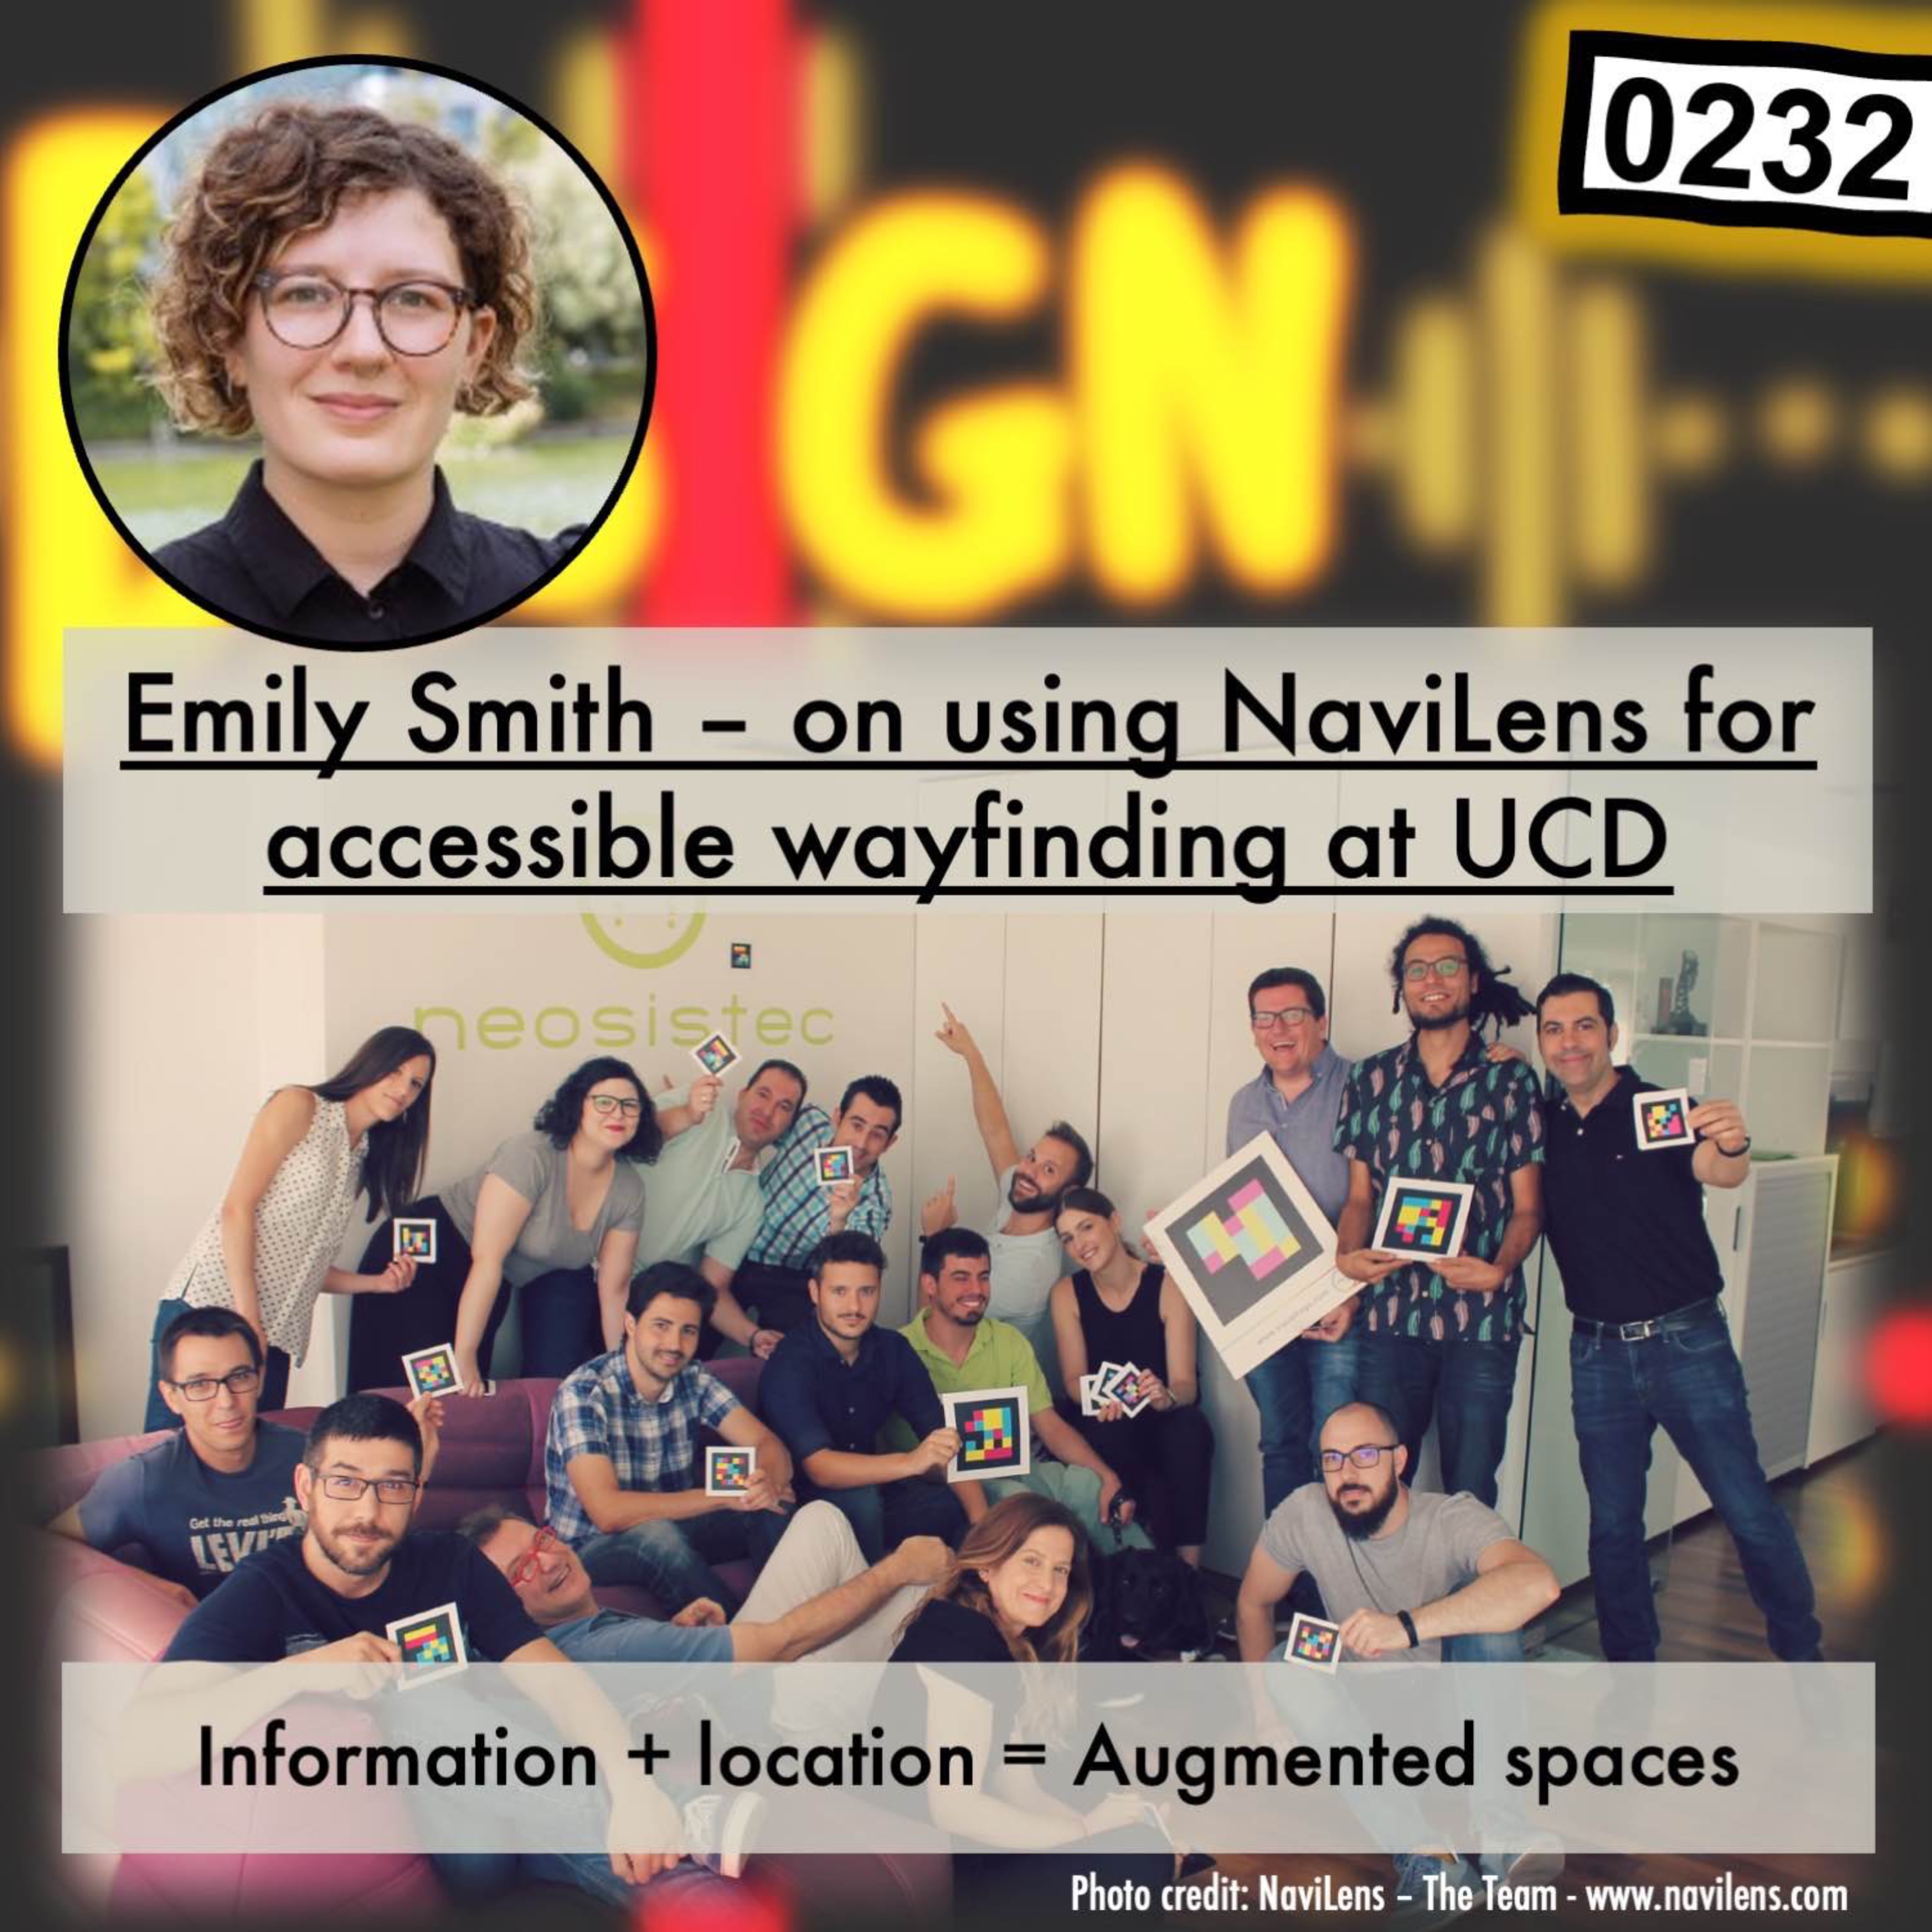 cover art for 0232 - NaviLens for accessible wayfinding with Emily Smith